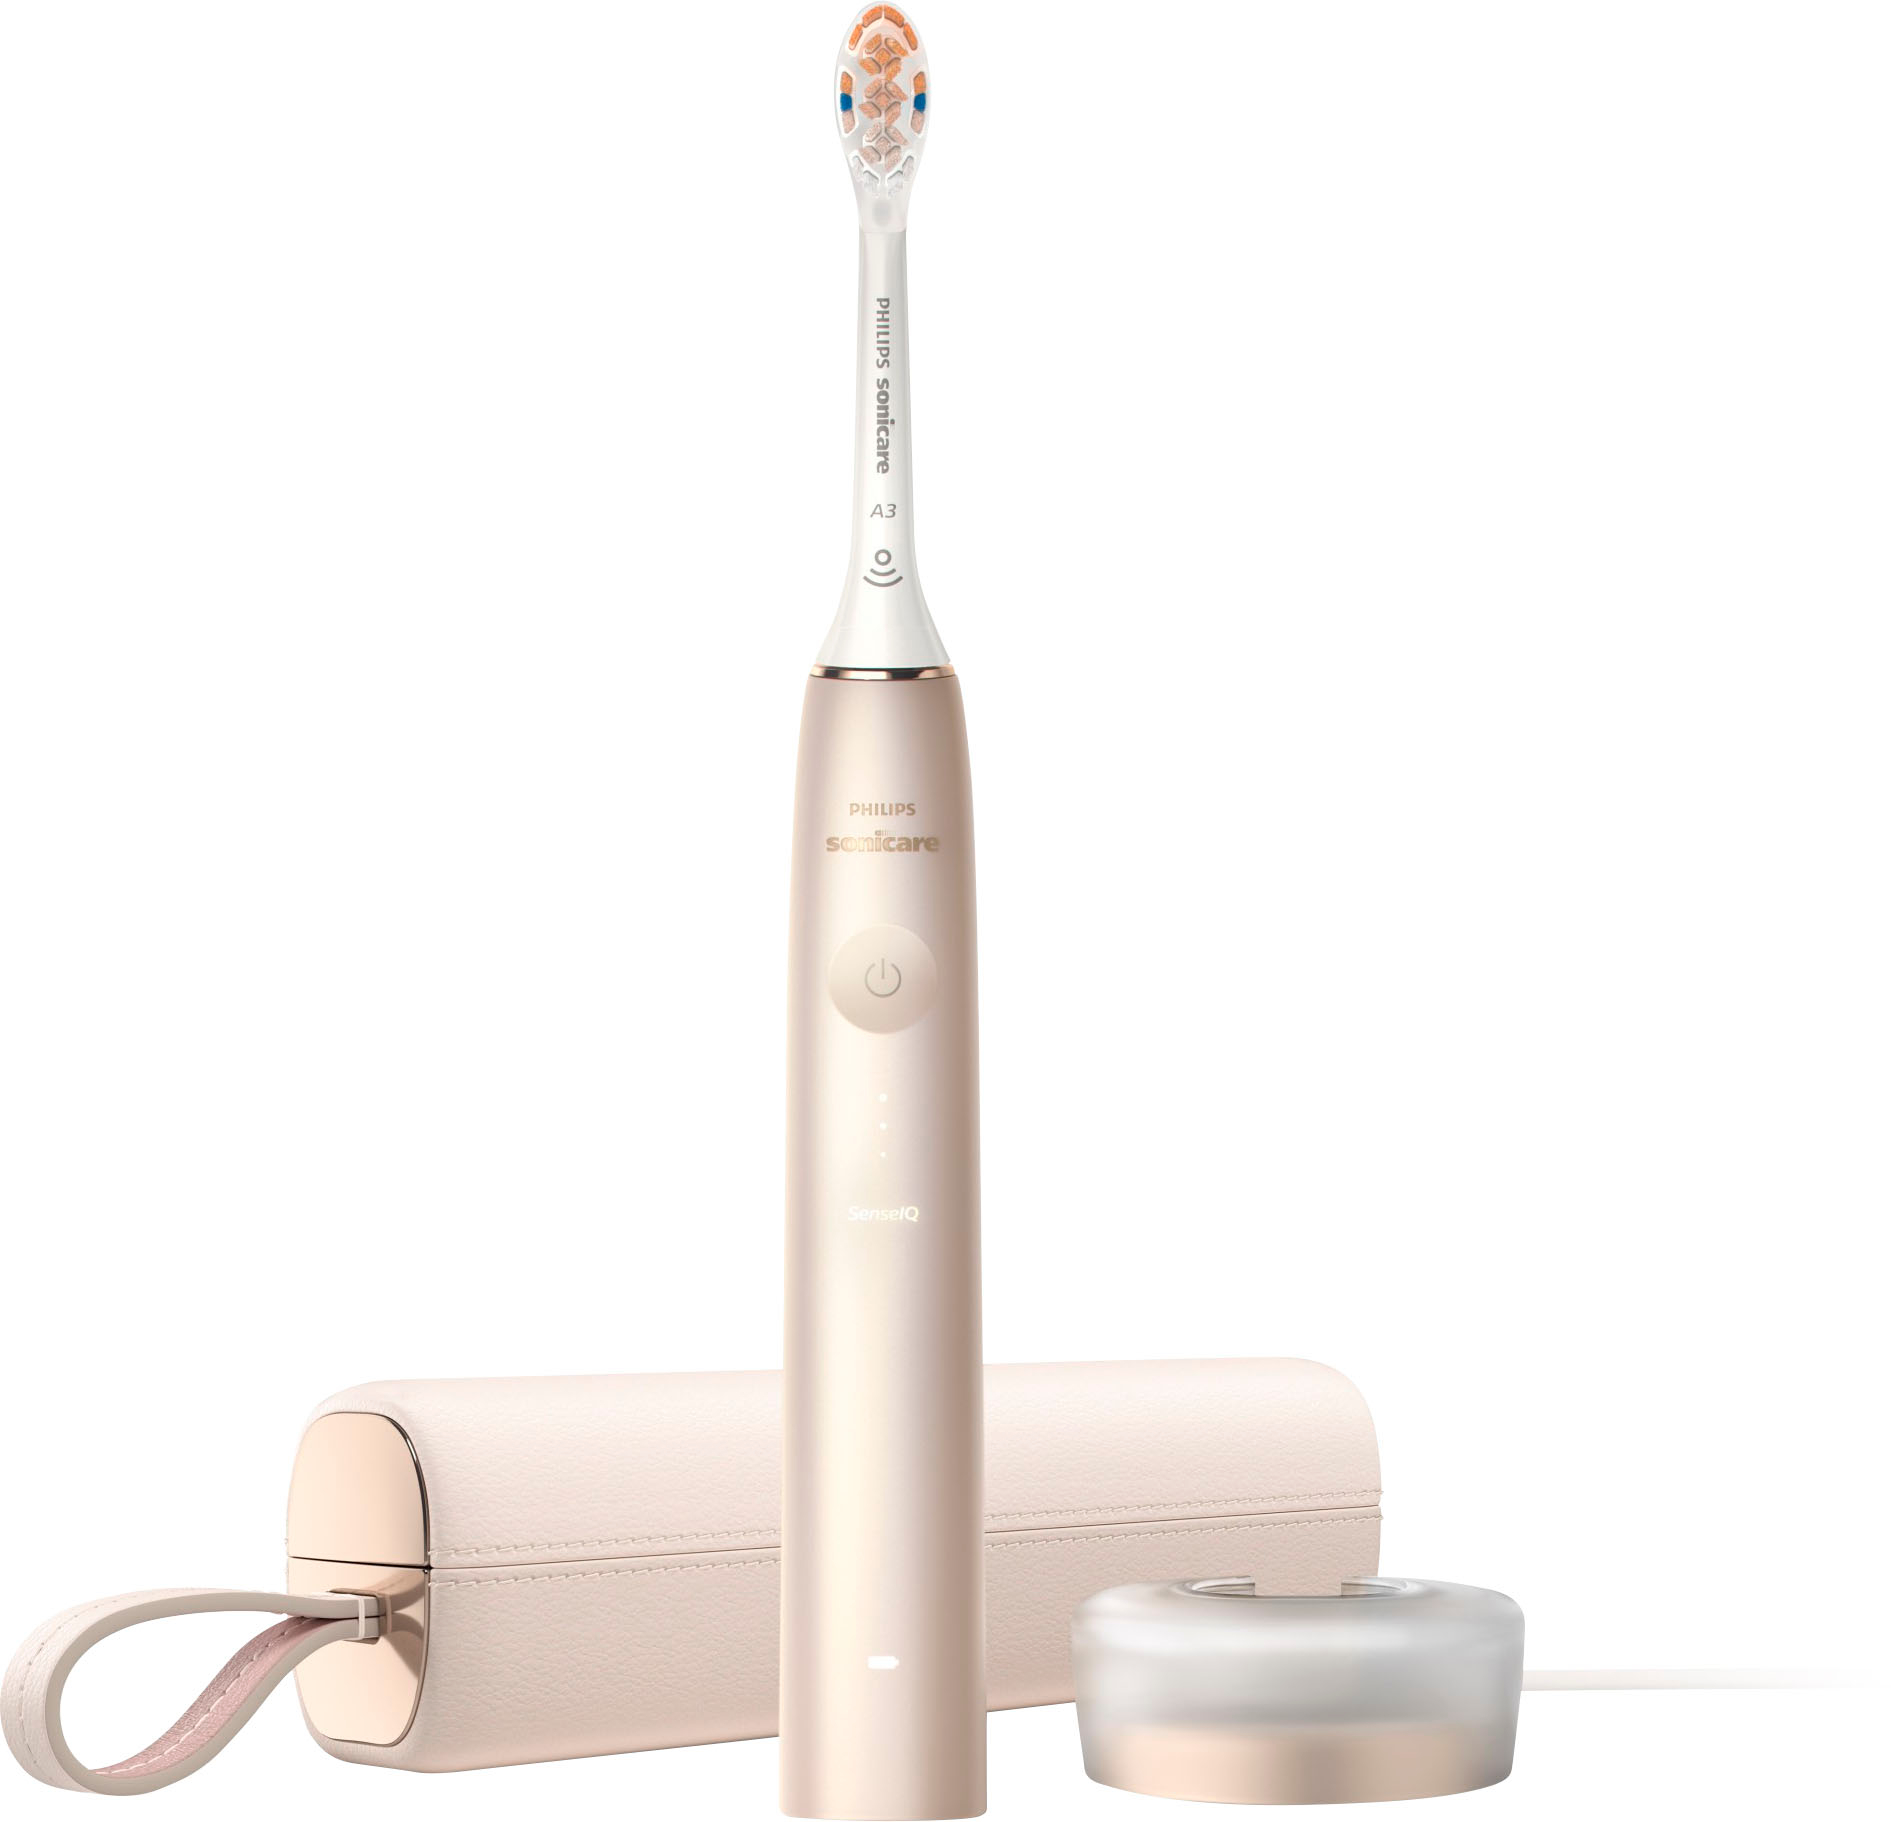 Angle View: Philips Sonicare 9900 Prestige Rechargeable Electric Toothbrush with SenseIQ - Midnight